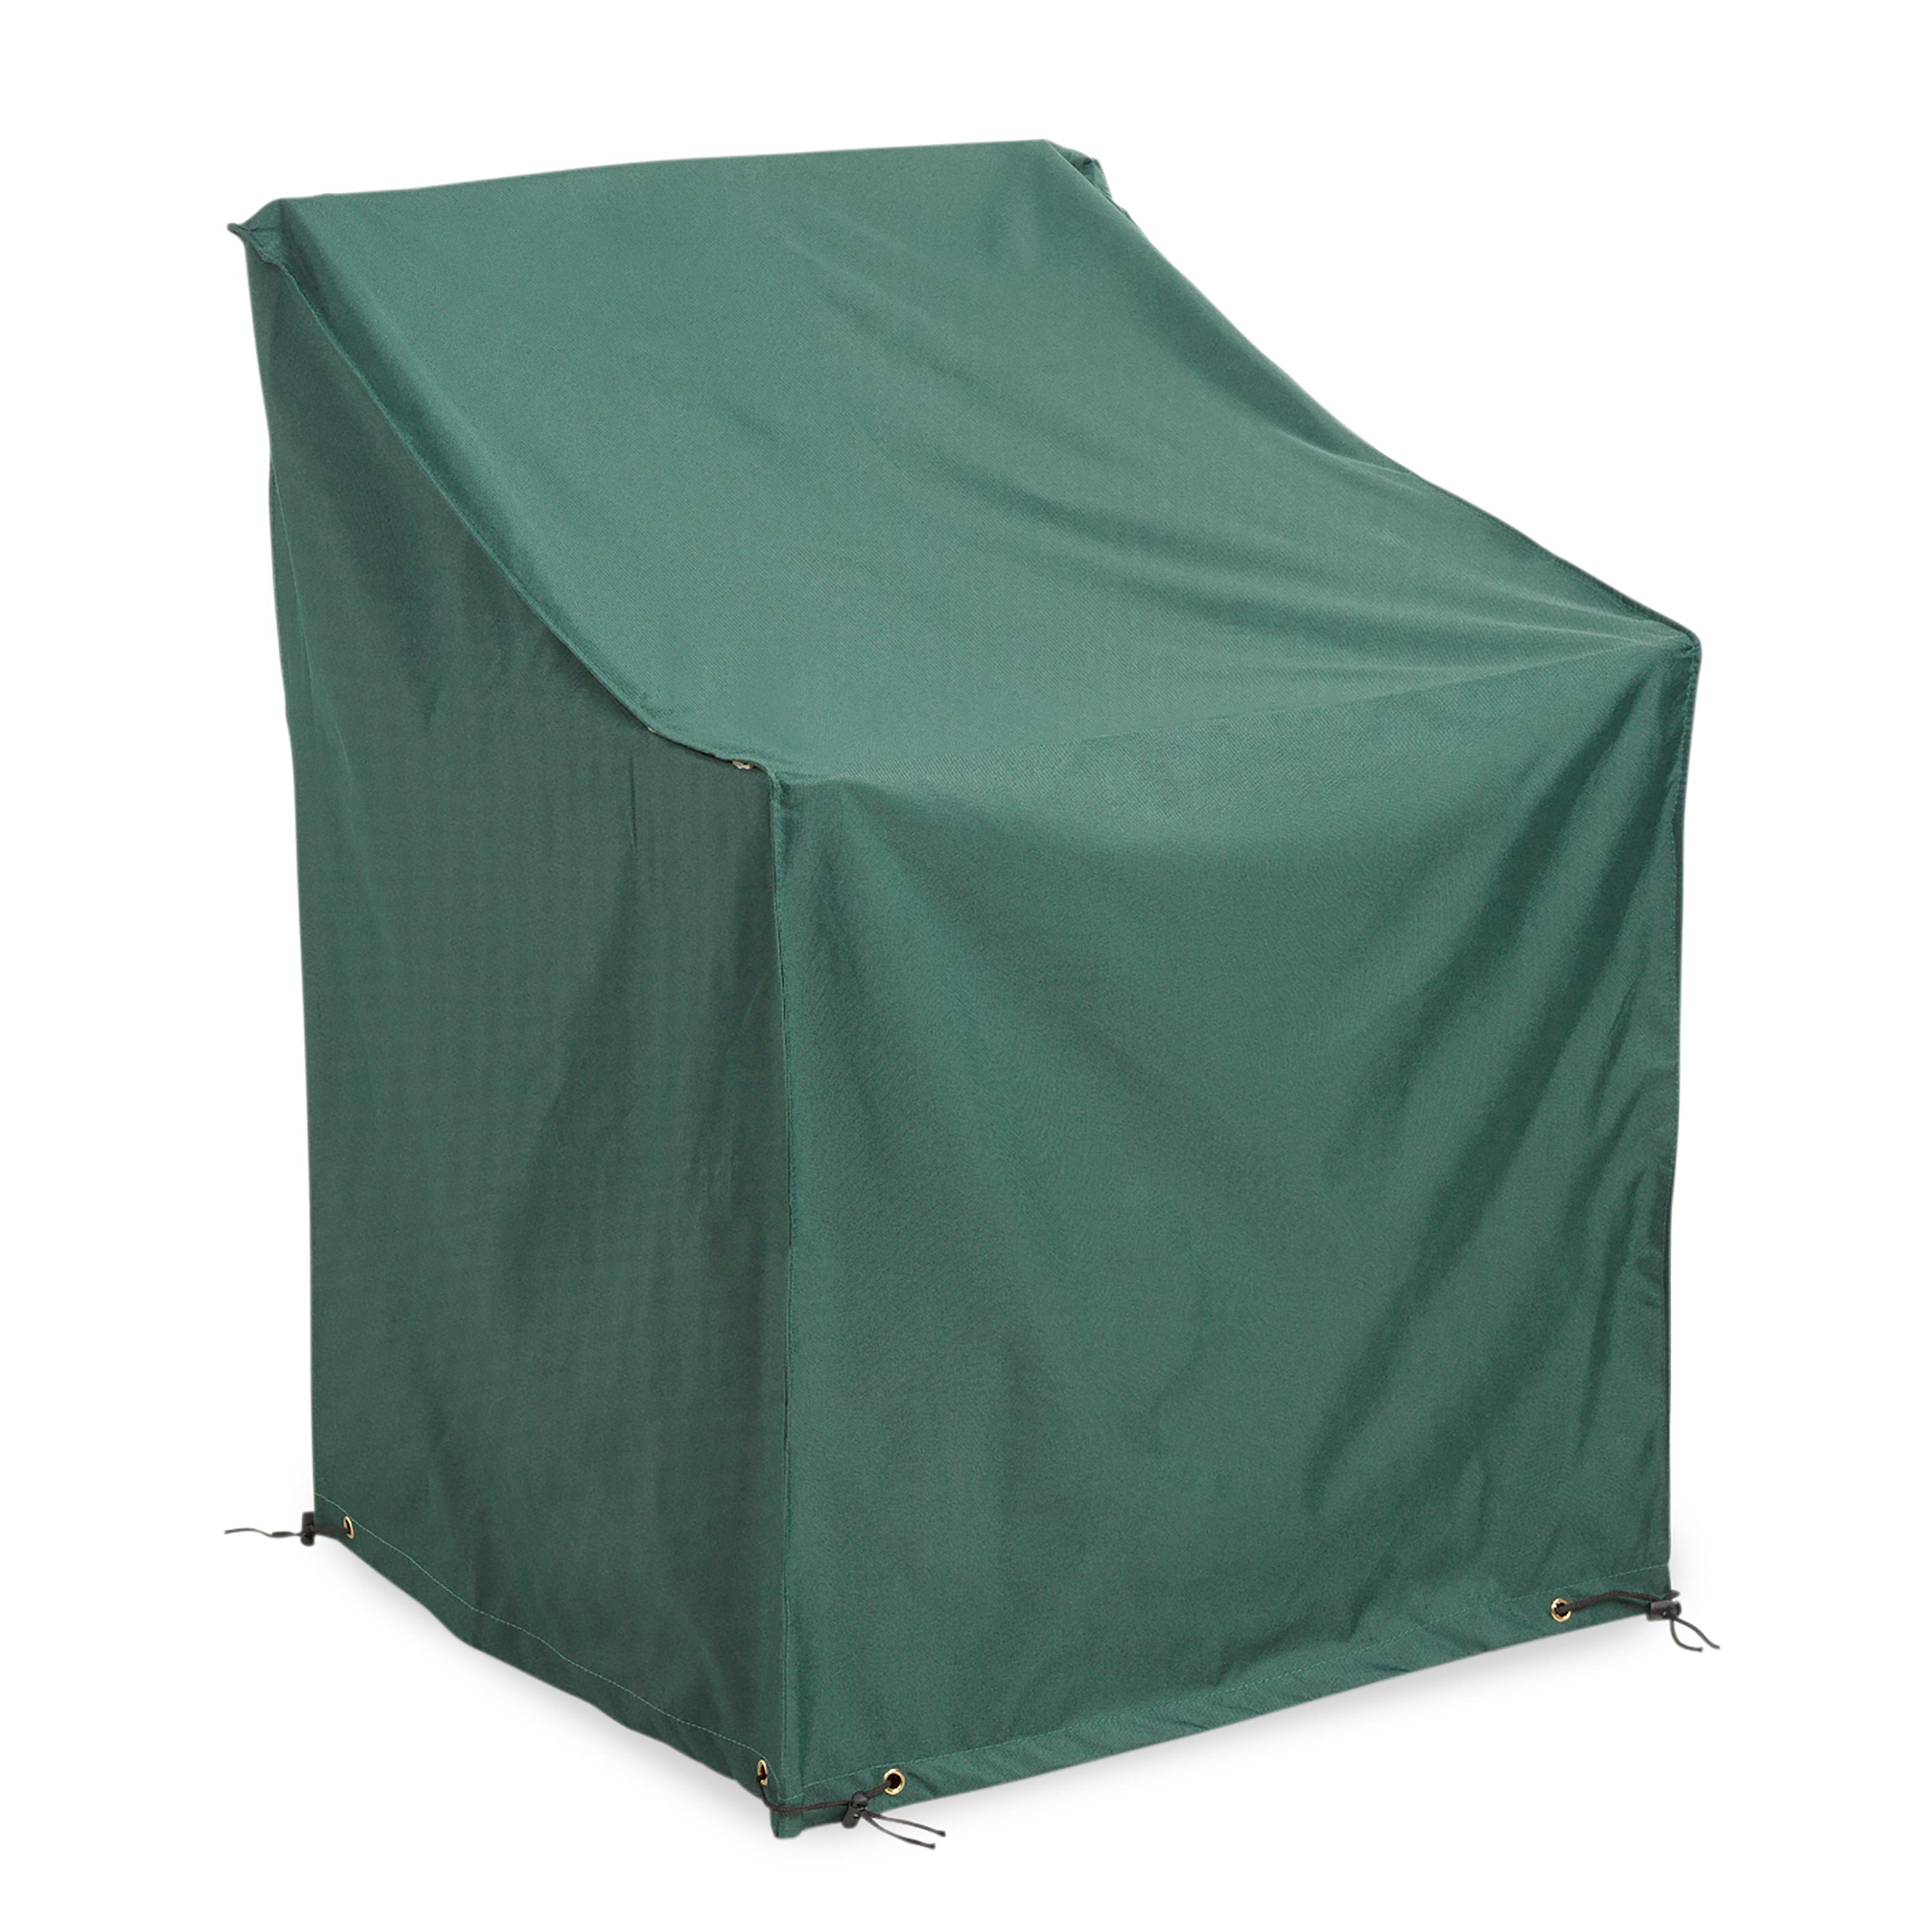 All-Weather Outdoor Furniture Cover for Armchair, 27" x 26", in Green